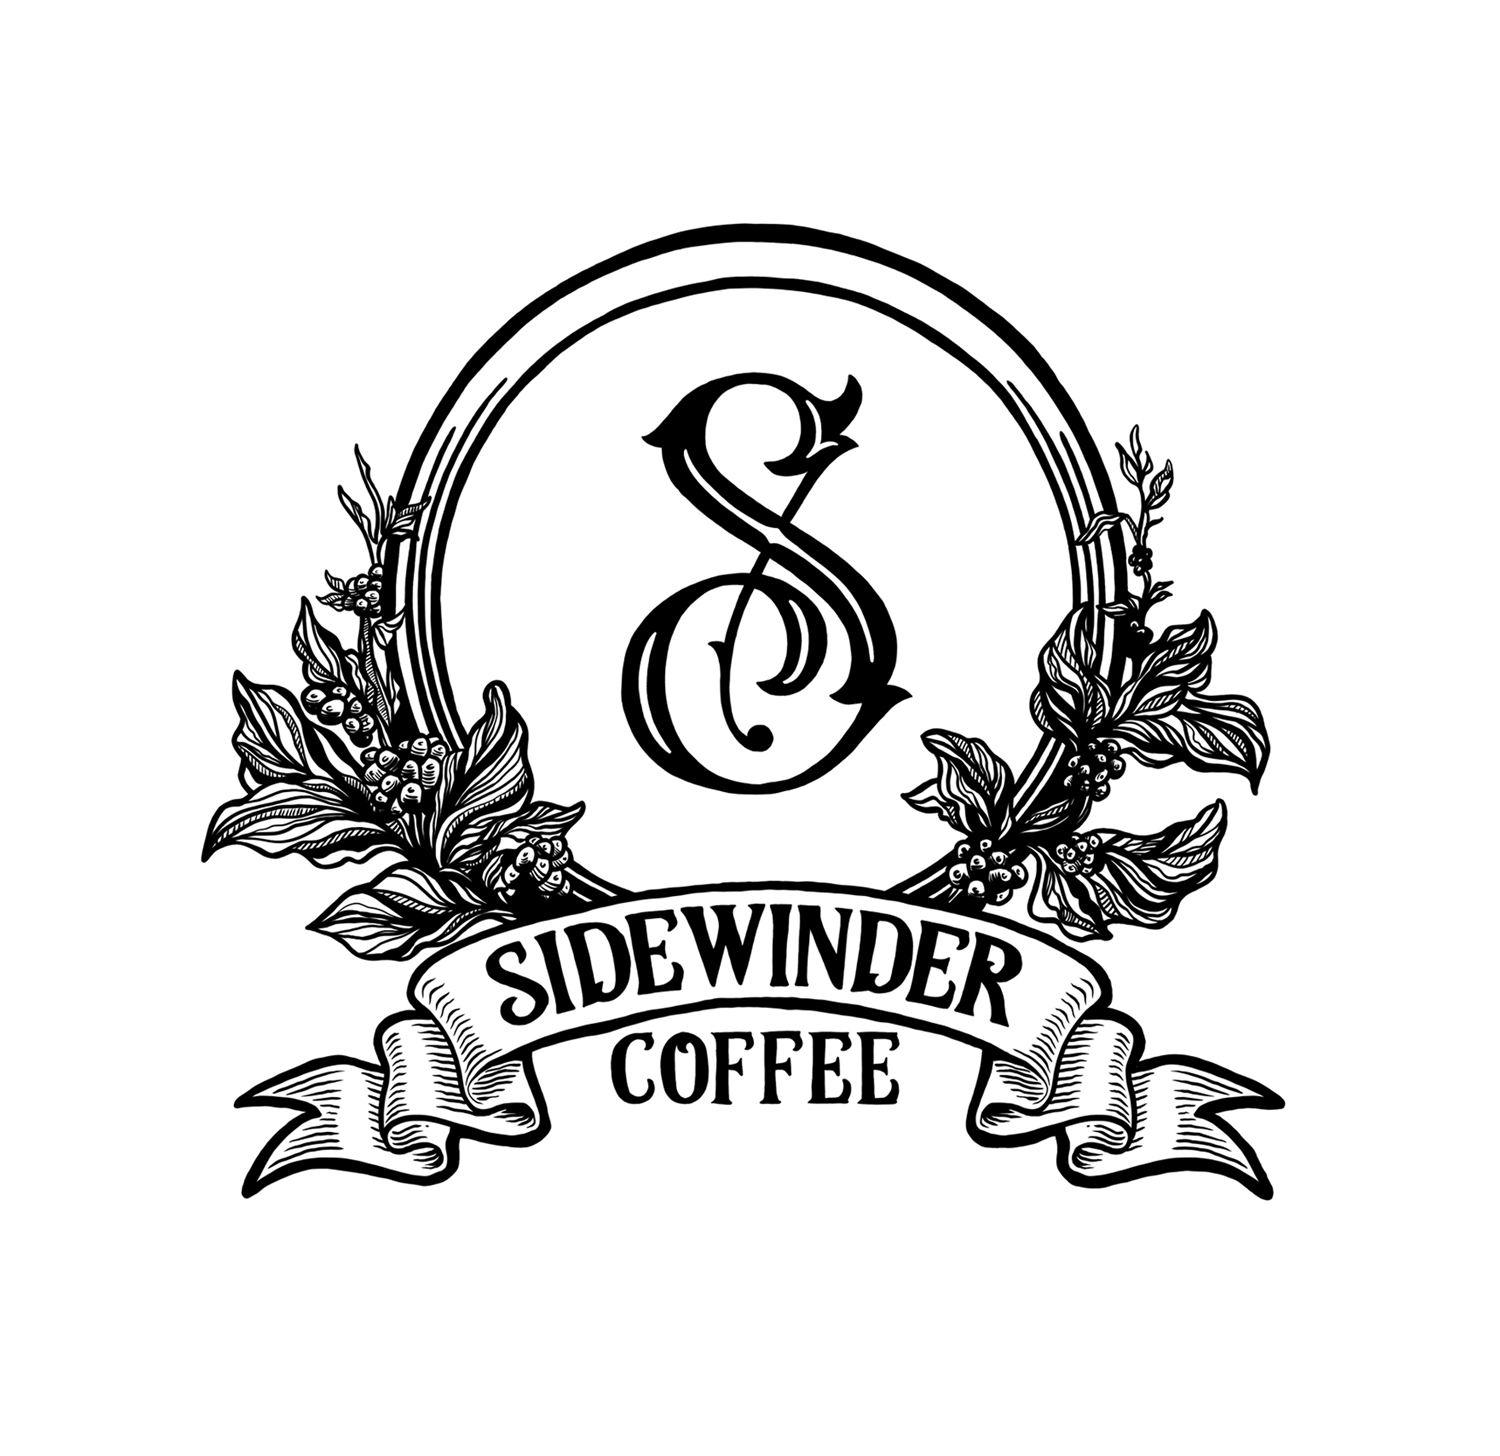 Sidewinder Coffee logo design by logo designer SnellBeast for your inspiration and for the worlds largest logo competition